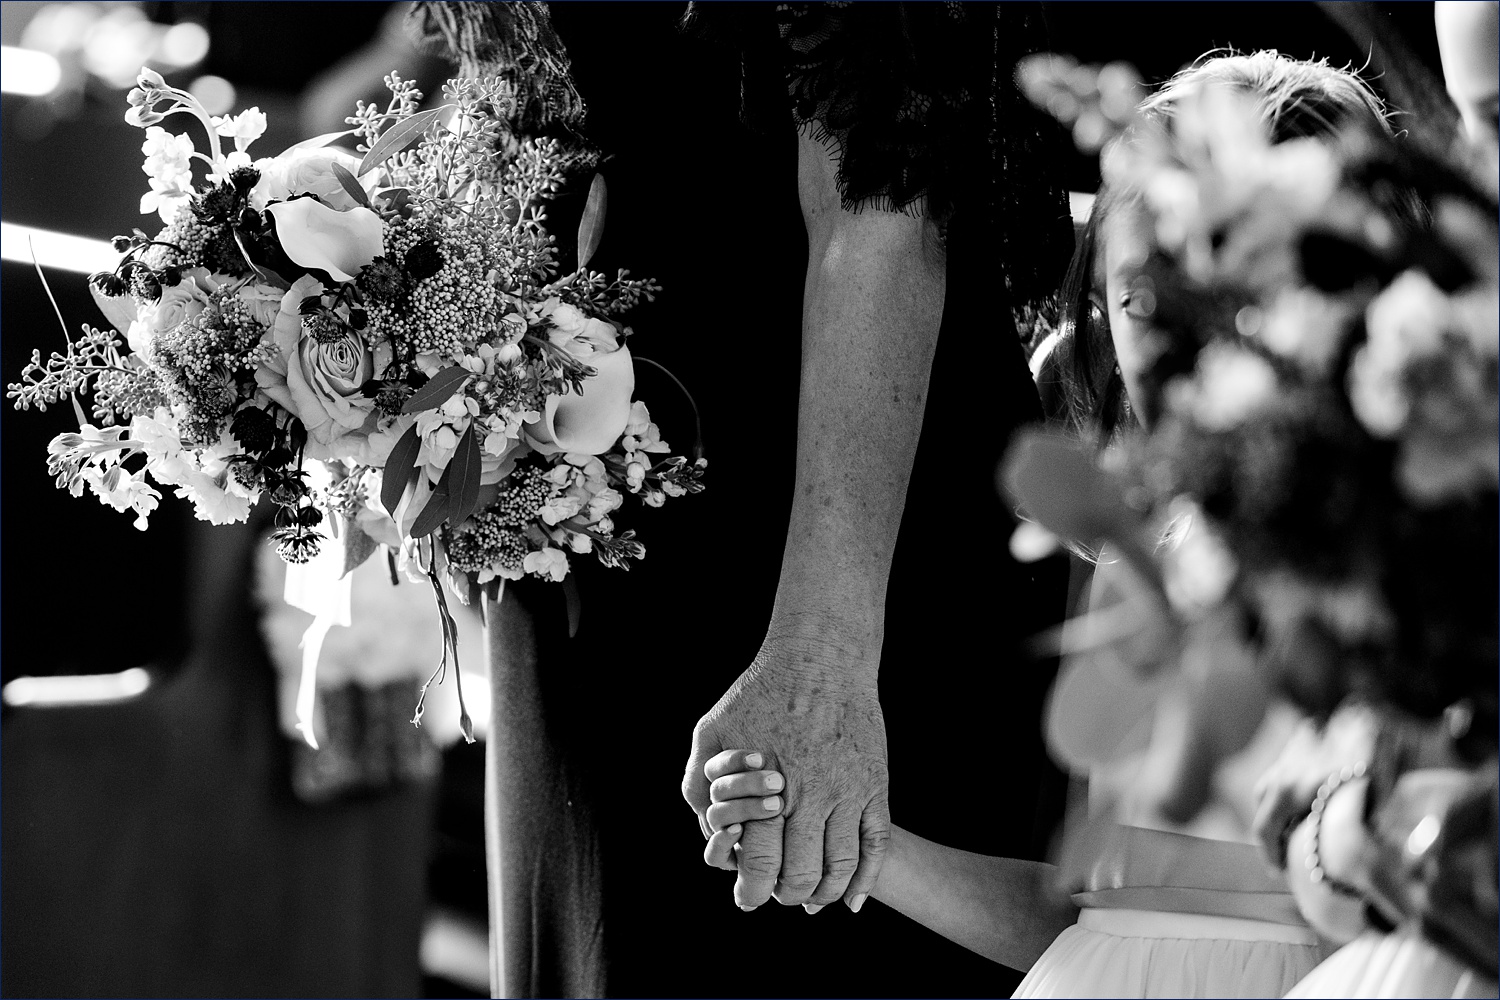 Grandma holding hands with her granddaughter during the wedding ceremony